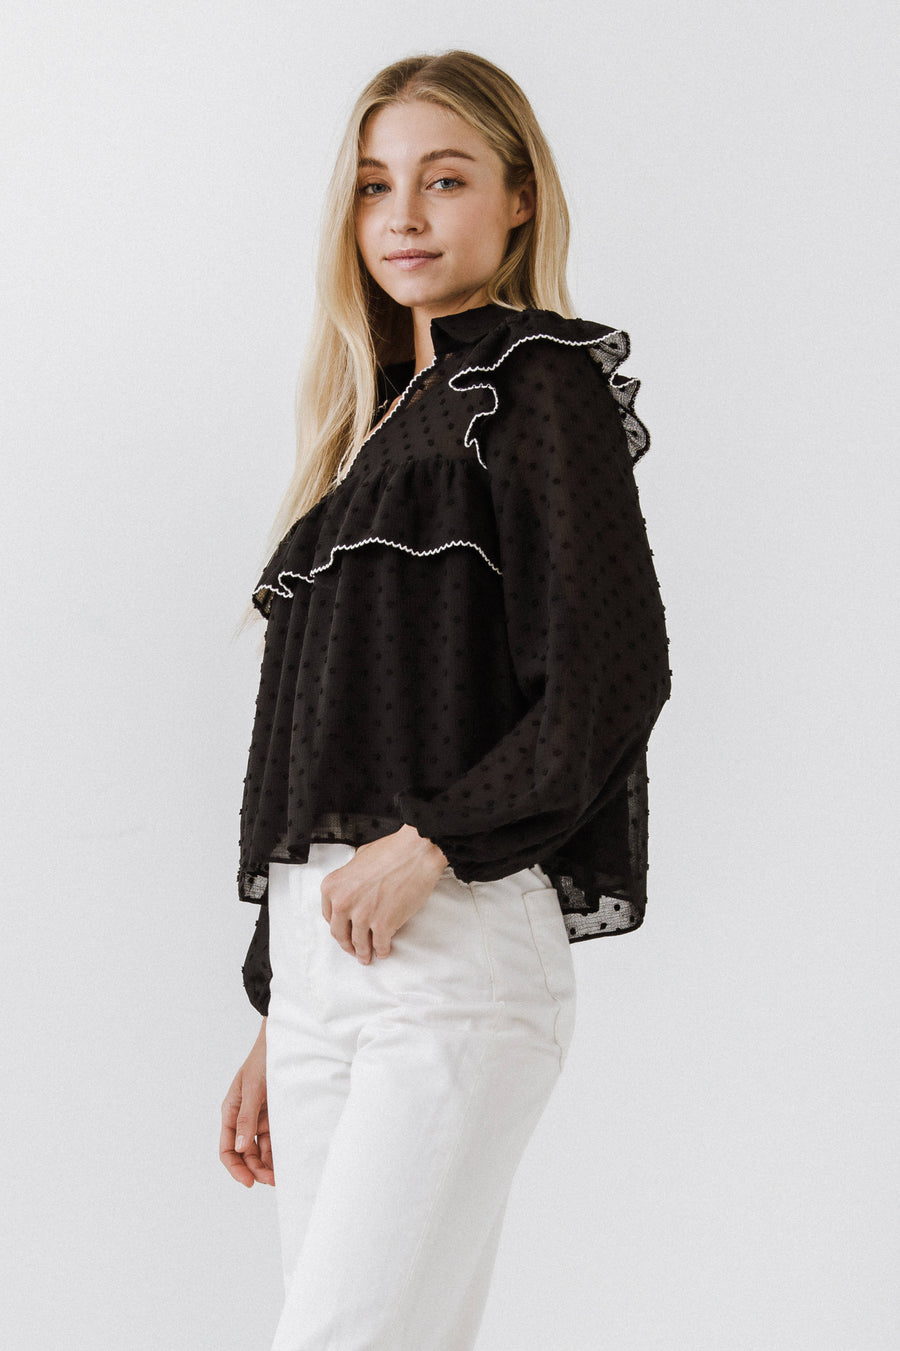 FREE THE ROSES-Swiss Dot Blouse with Ruffle Detail-SHIRTS & BLOUSES available at Objectrare